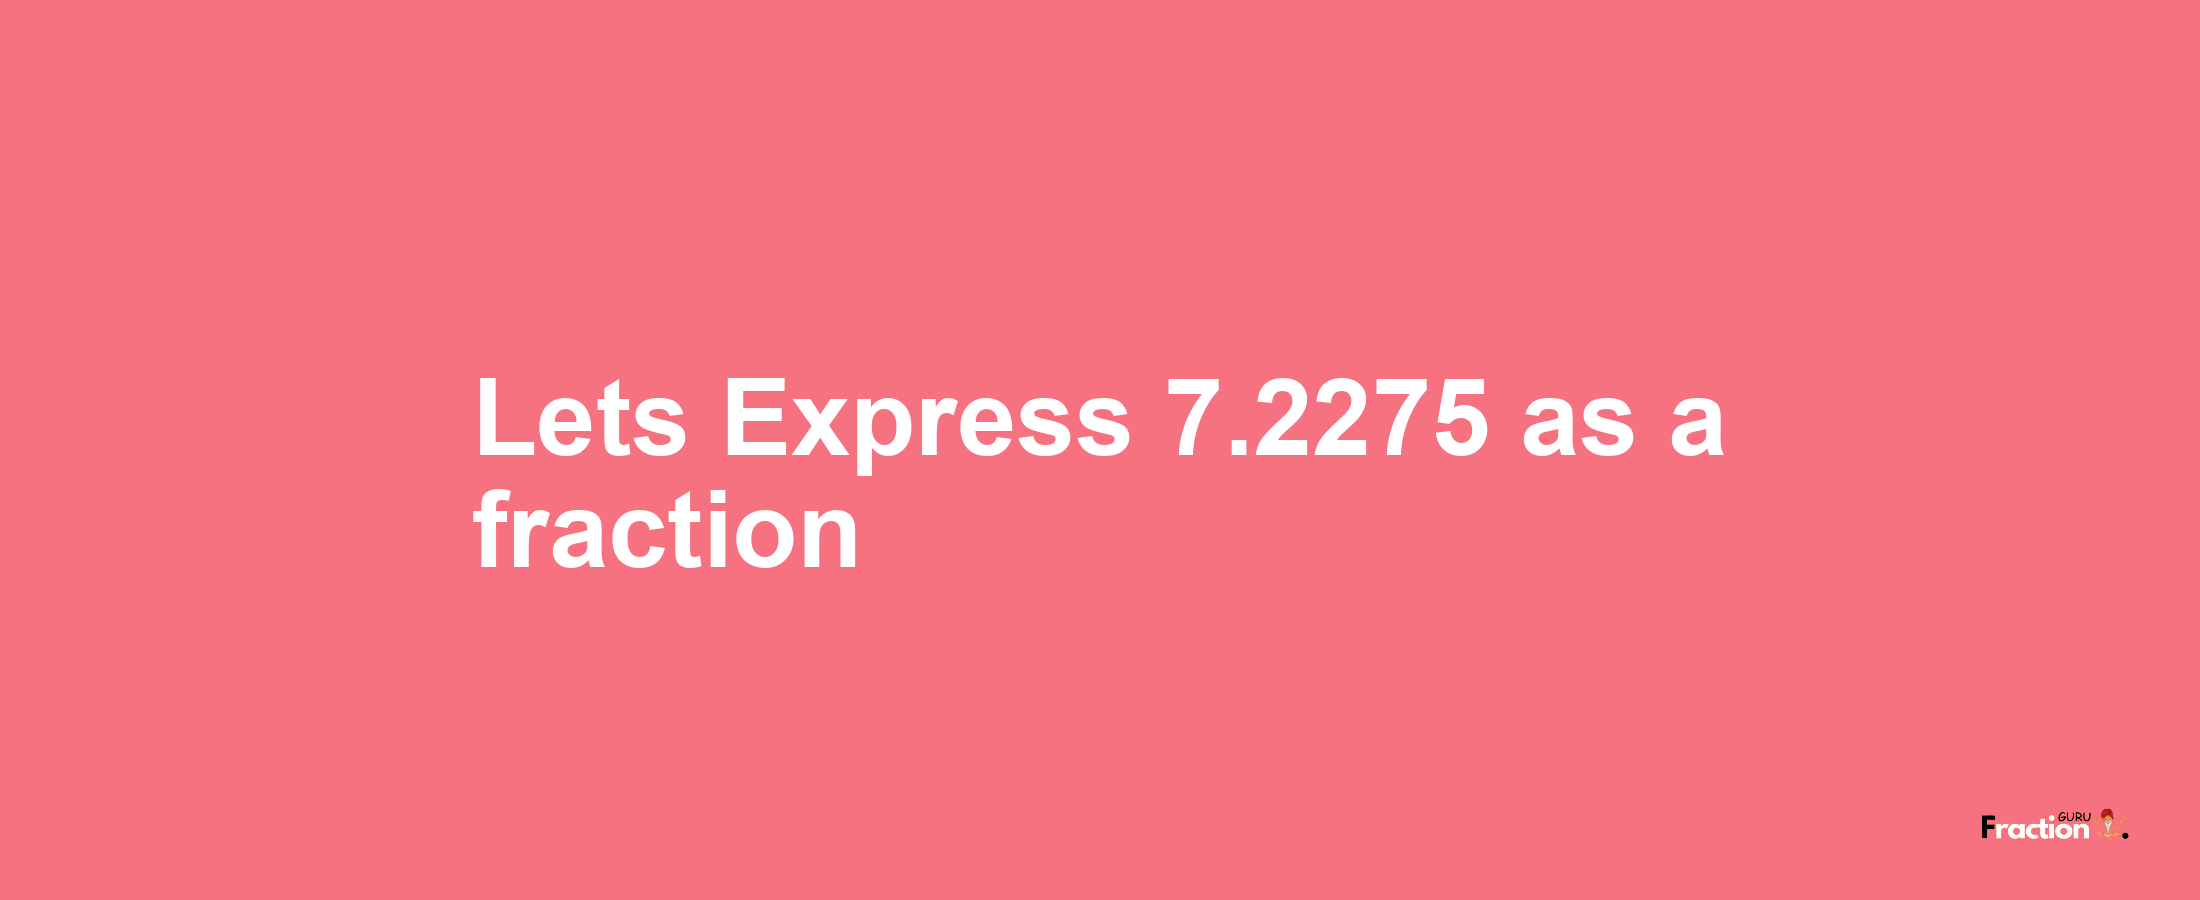 Lets Express 7.2275 as afraction